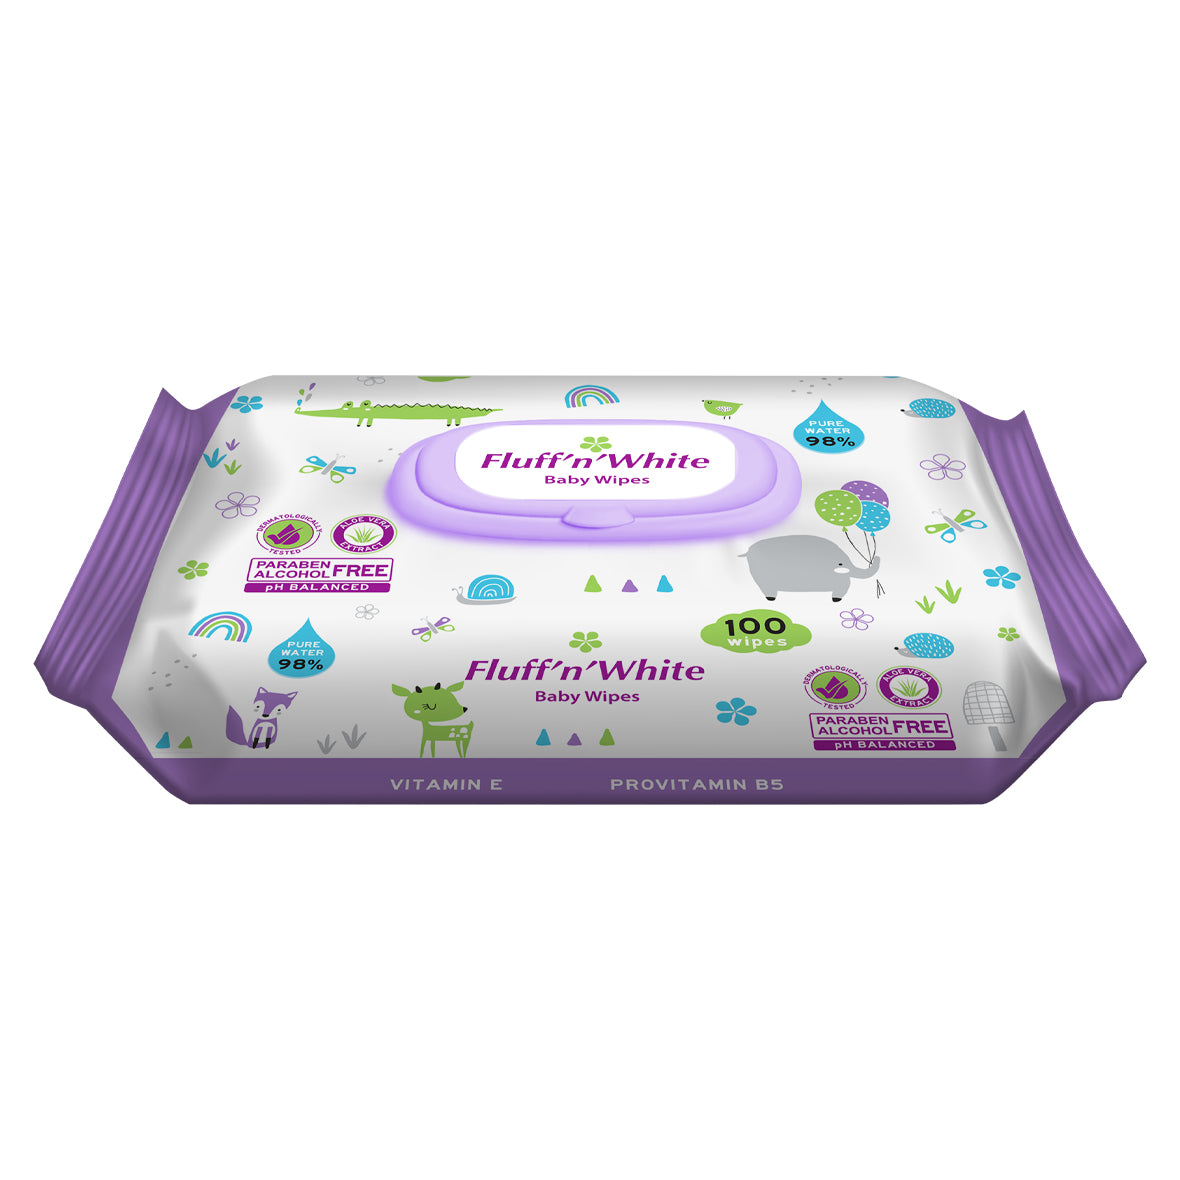 Fluff n White - Baby Wipes 100 sheets